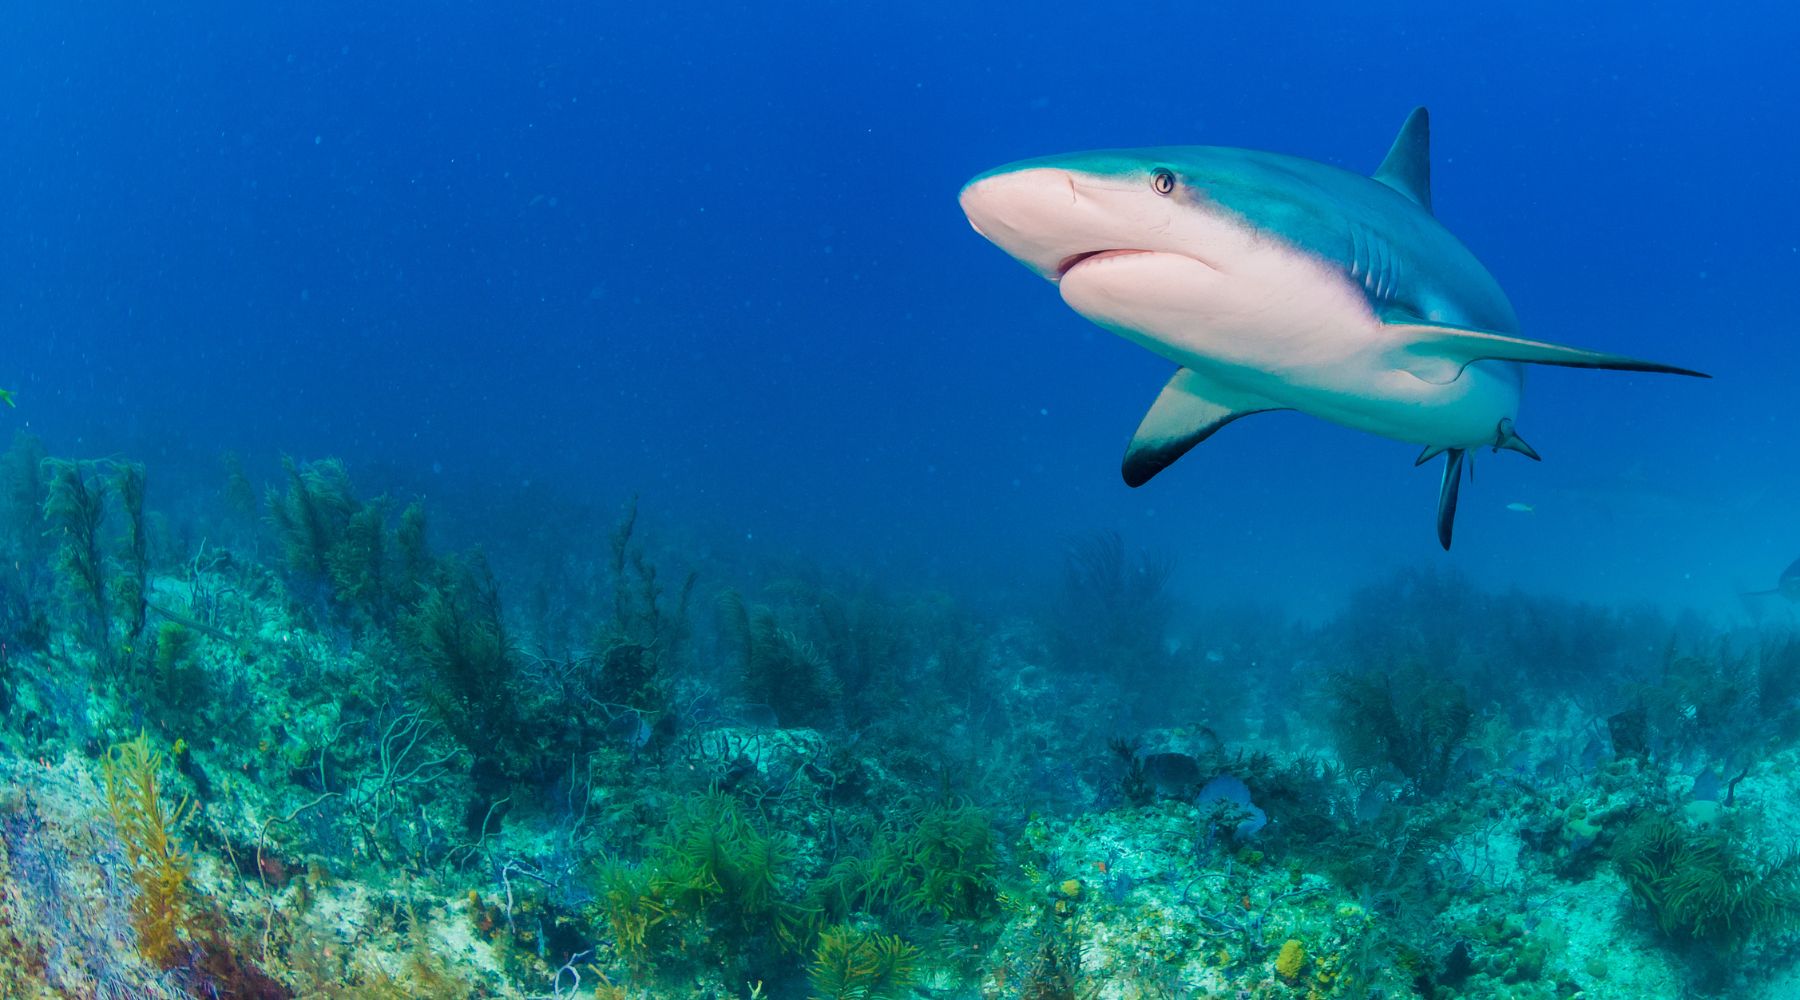 Why are sharks important to the ecosystem?